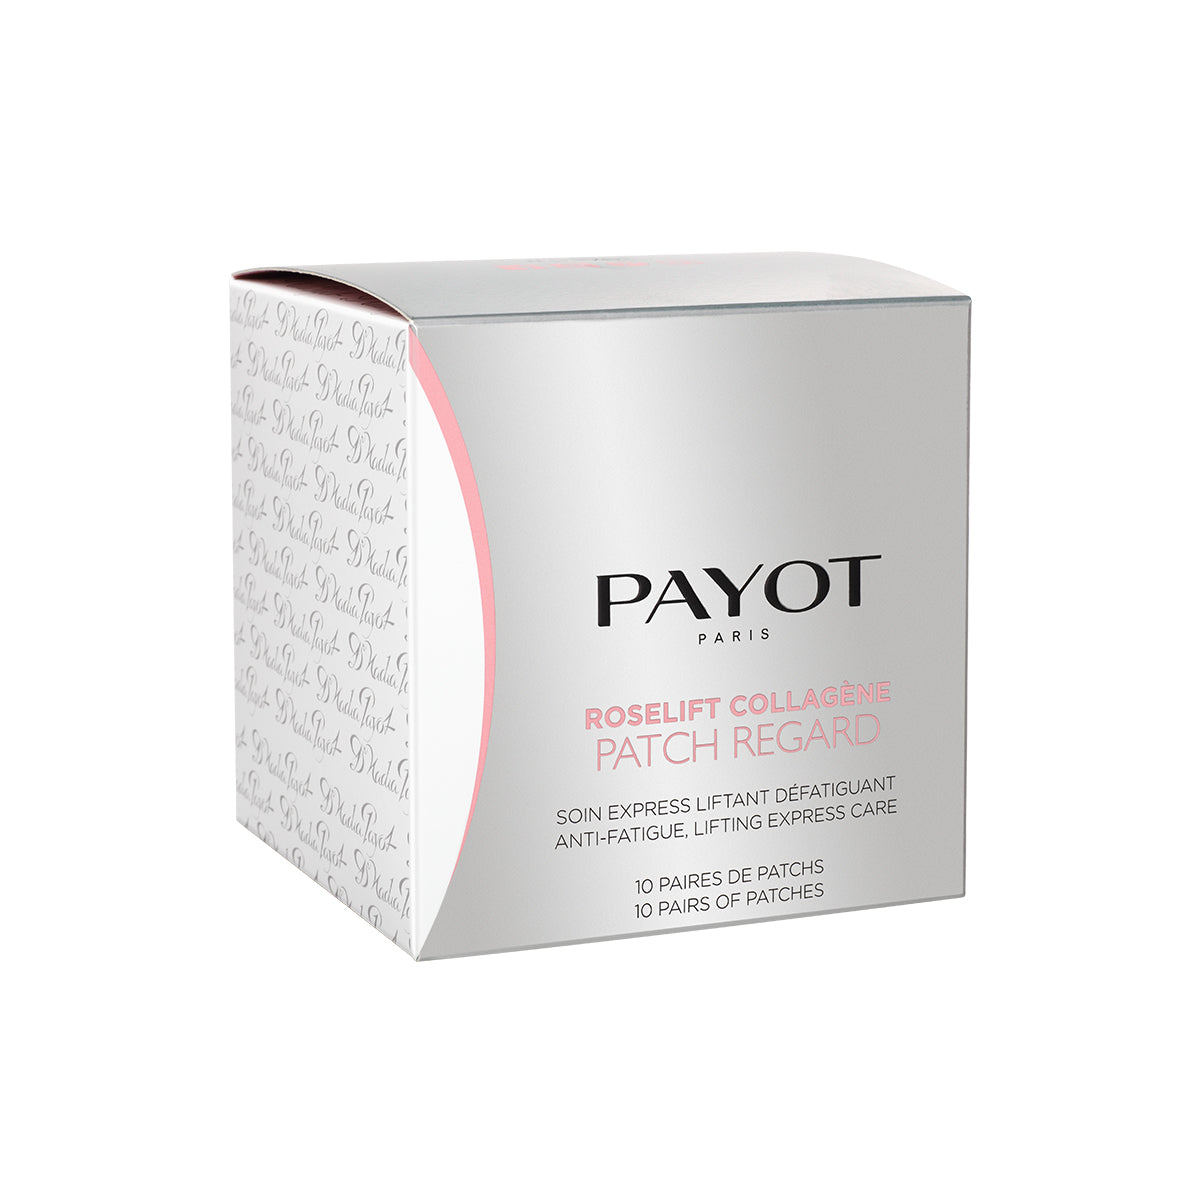 Payot Roselift Collagene Patch Regard - 10 Duo Sachets